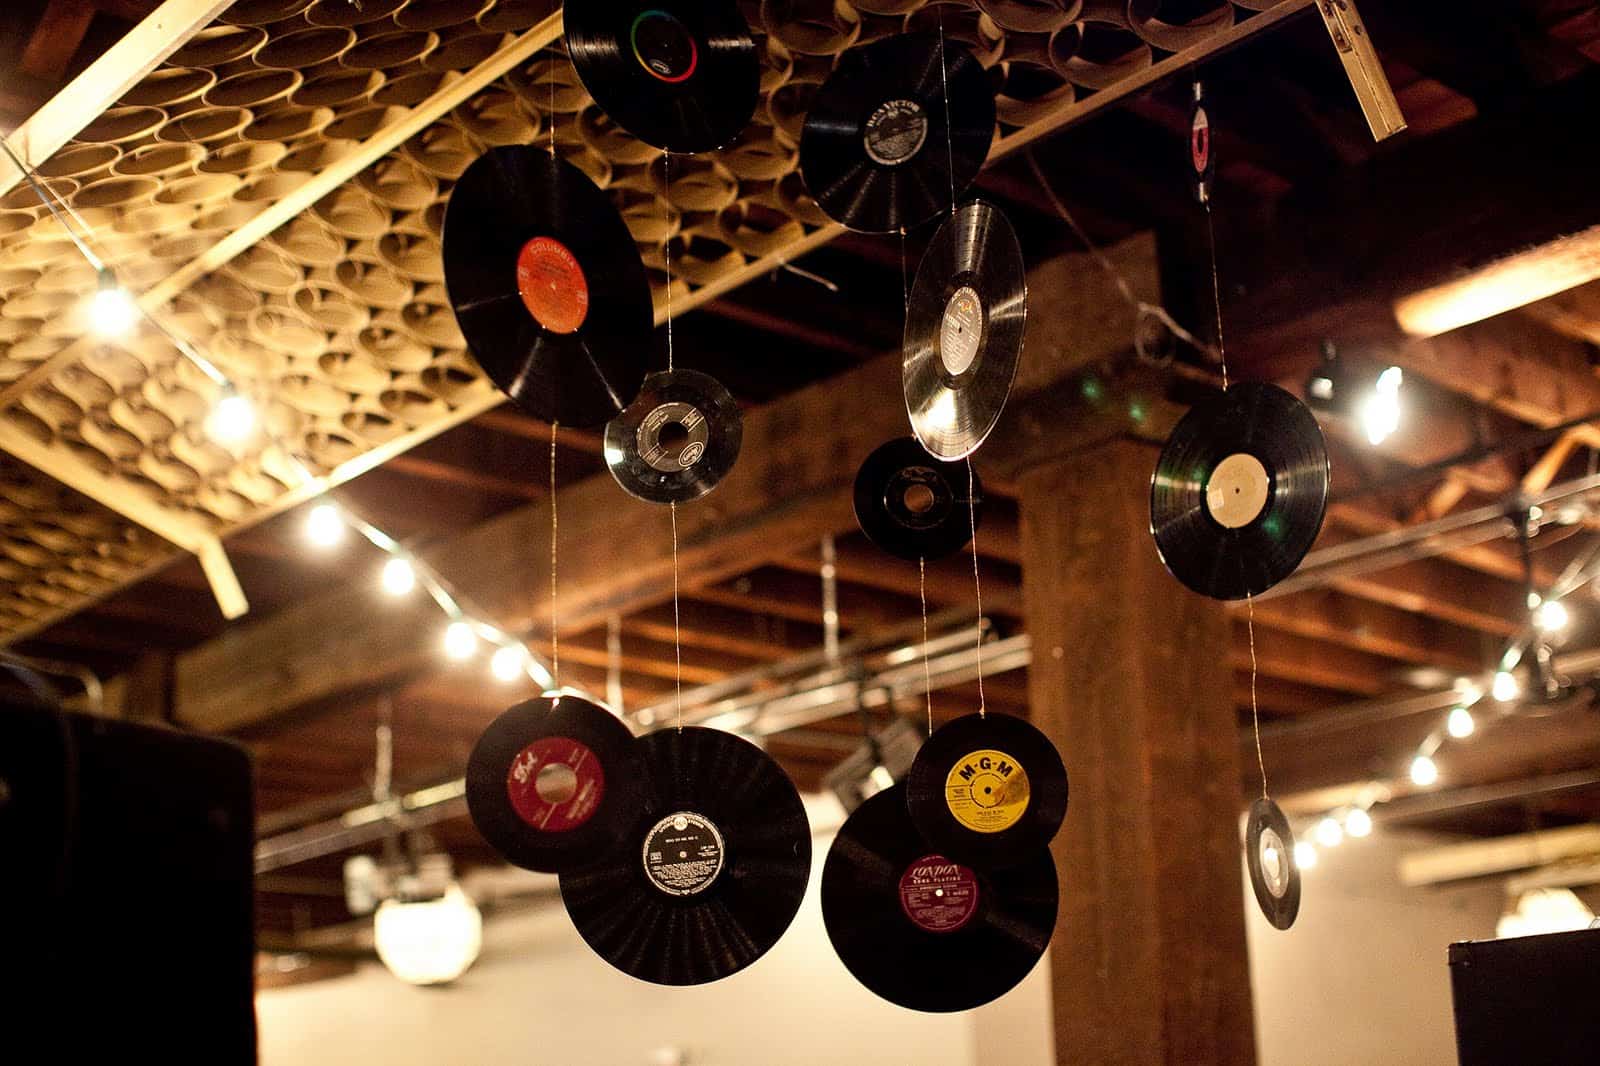 Hanging record party decor